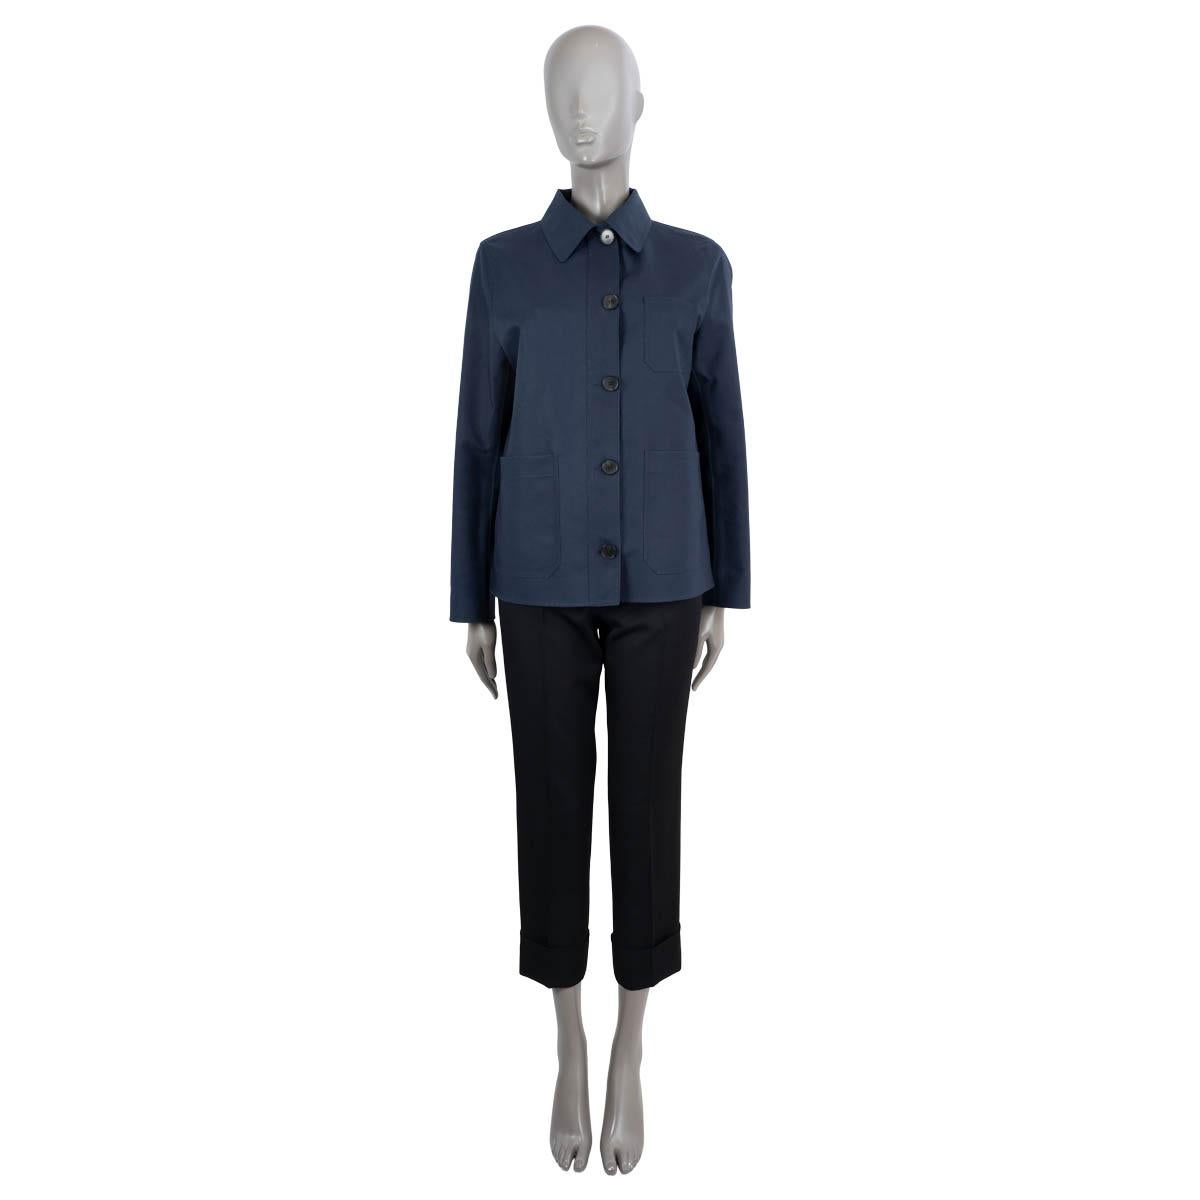 100% authentic Christian Dior Caro jacket in midnight blue coated cotton (100%). Features a straight, oversized silhouette, three patch pockets and bee embroidery. Closes with buttons on the front and is lined Dior Oblique jacquard (100%